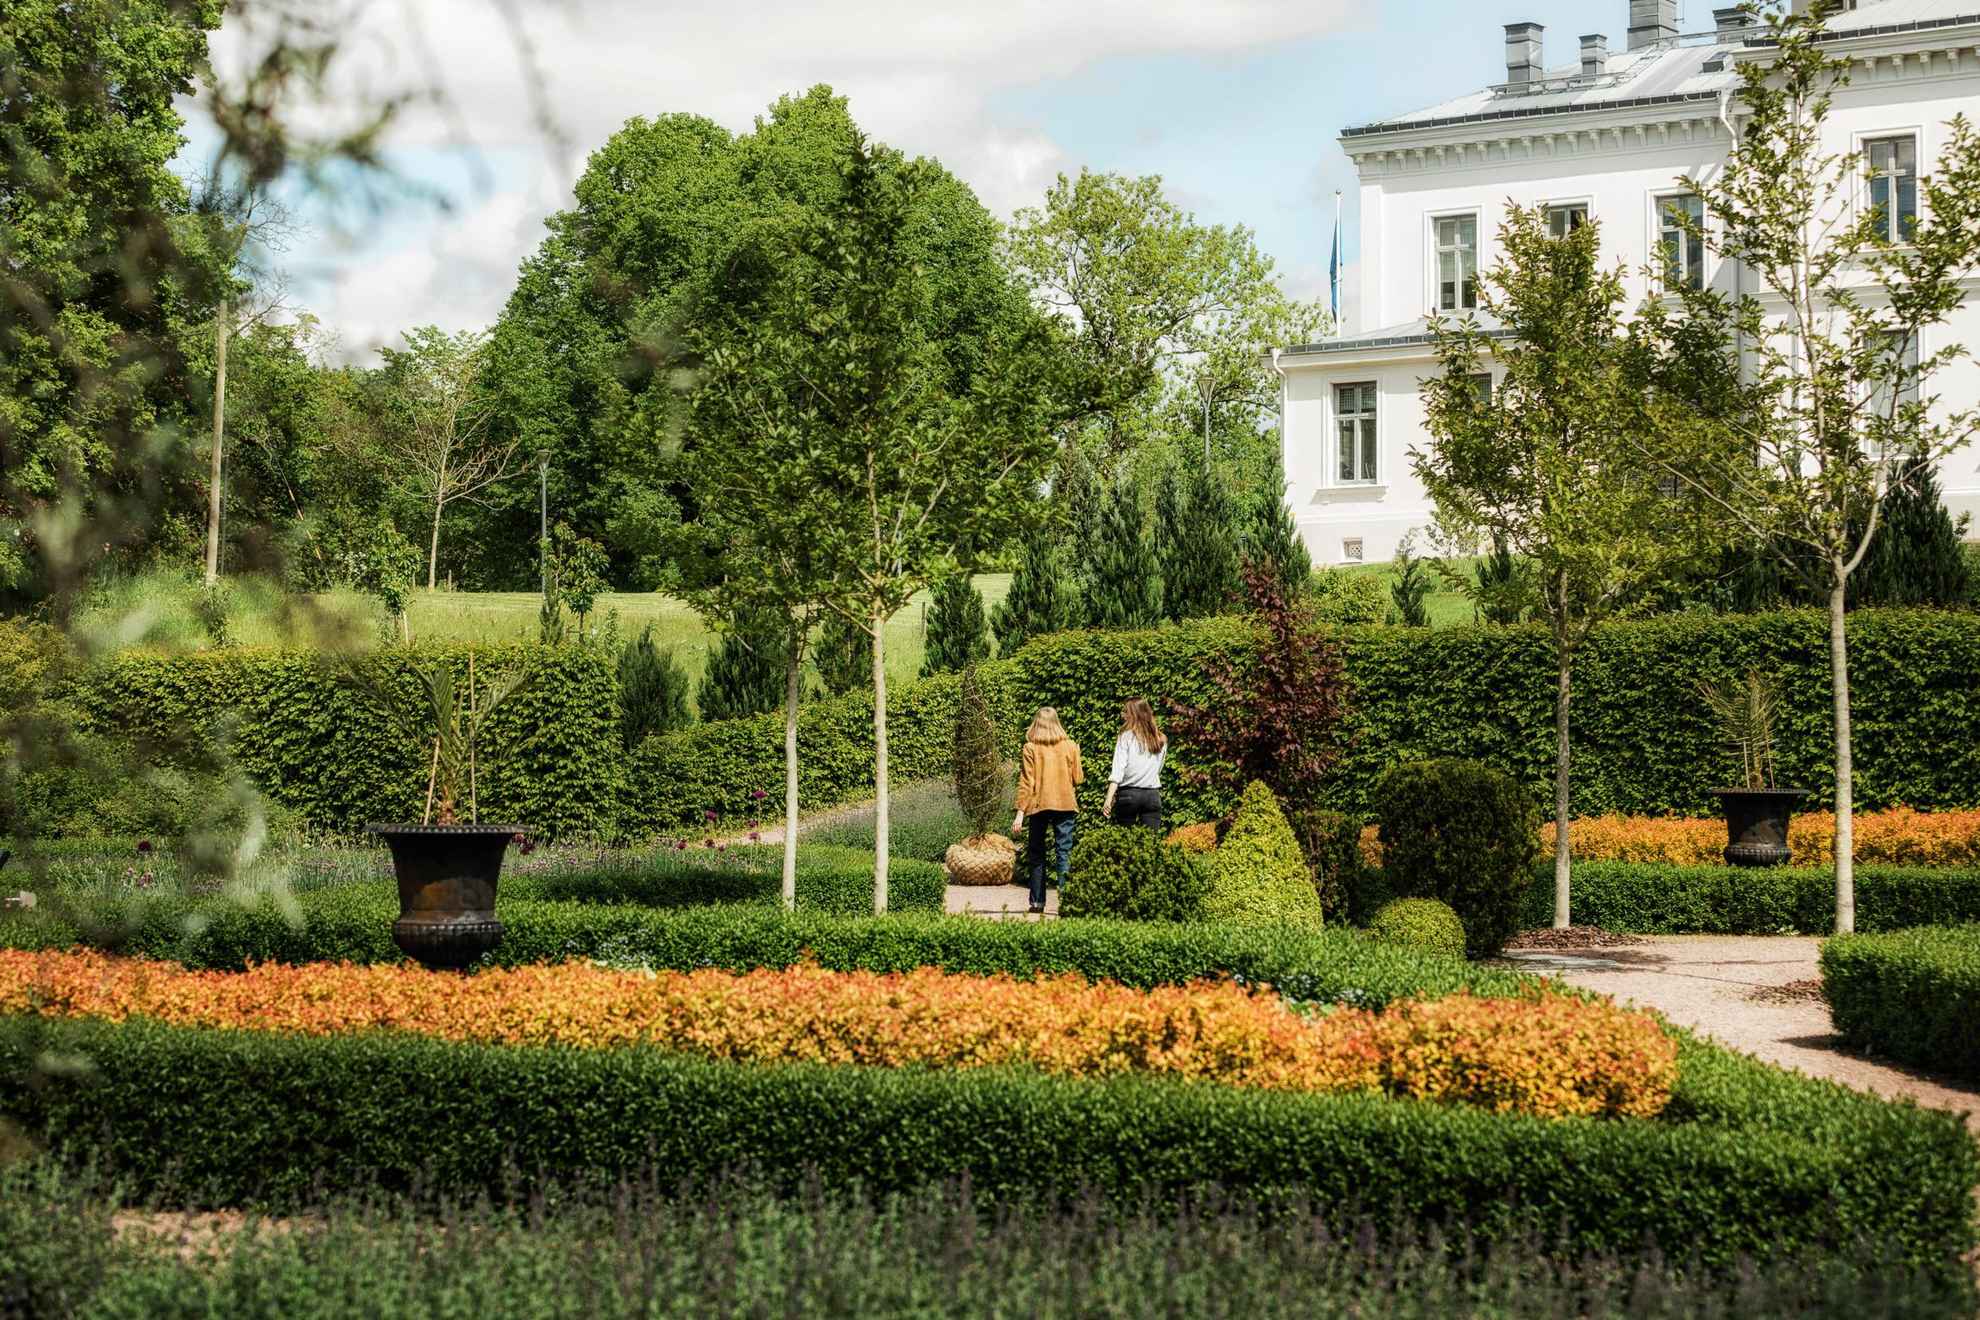 A beautiful arrange garden with orange plants between green bushes. A white 19th century manor house to the right and two women walking towards the house.